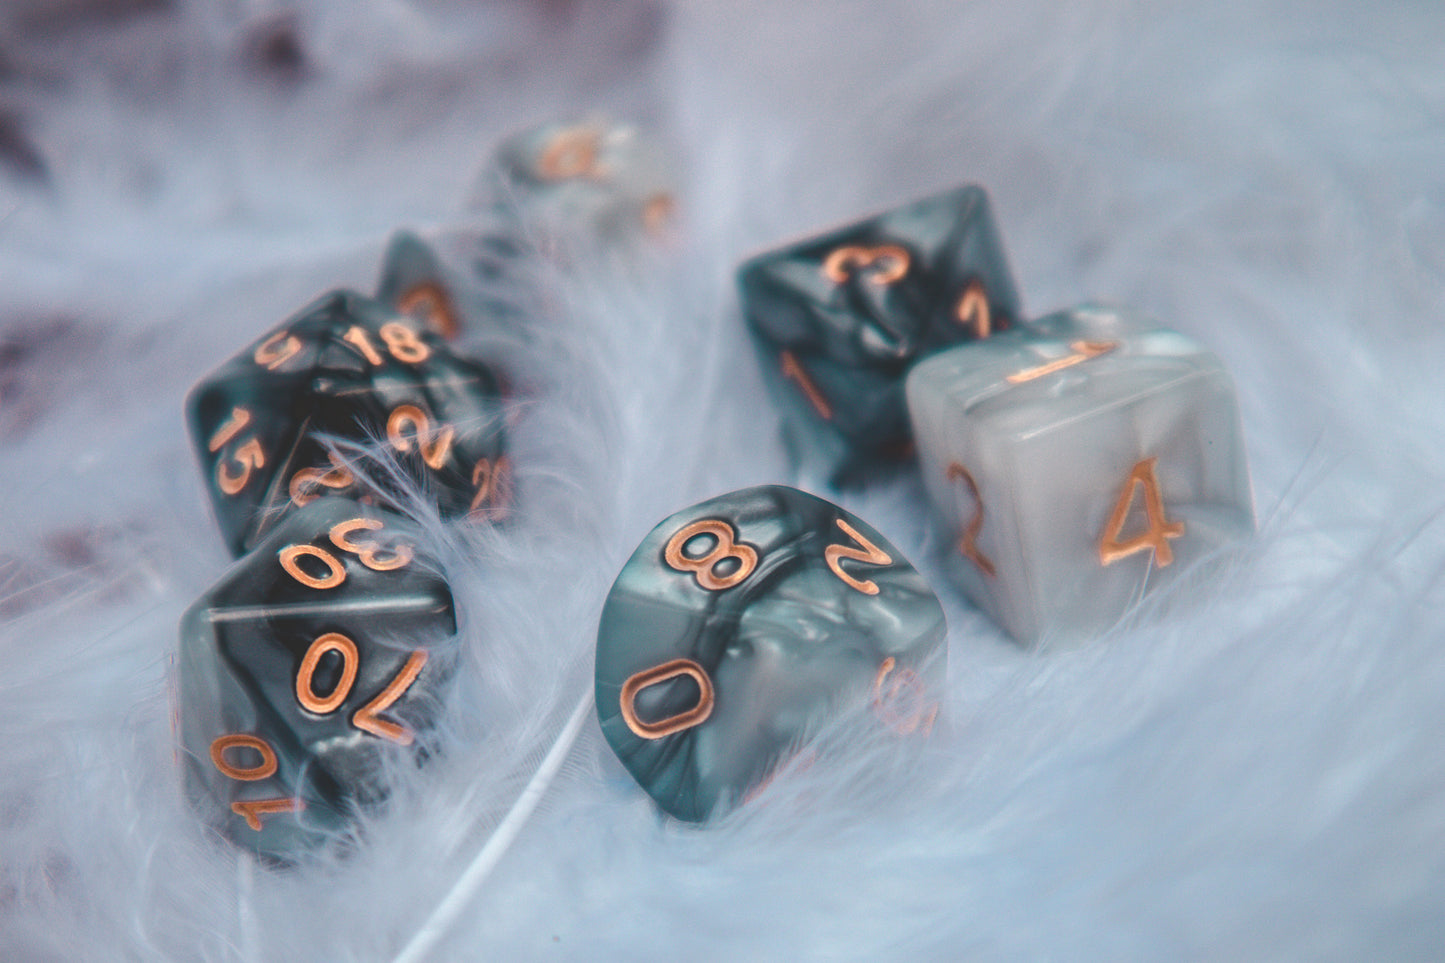 Underdark Ore Polyhedral dice set - Soft edge - The Flaming Feather & Flaming Filament